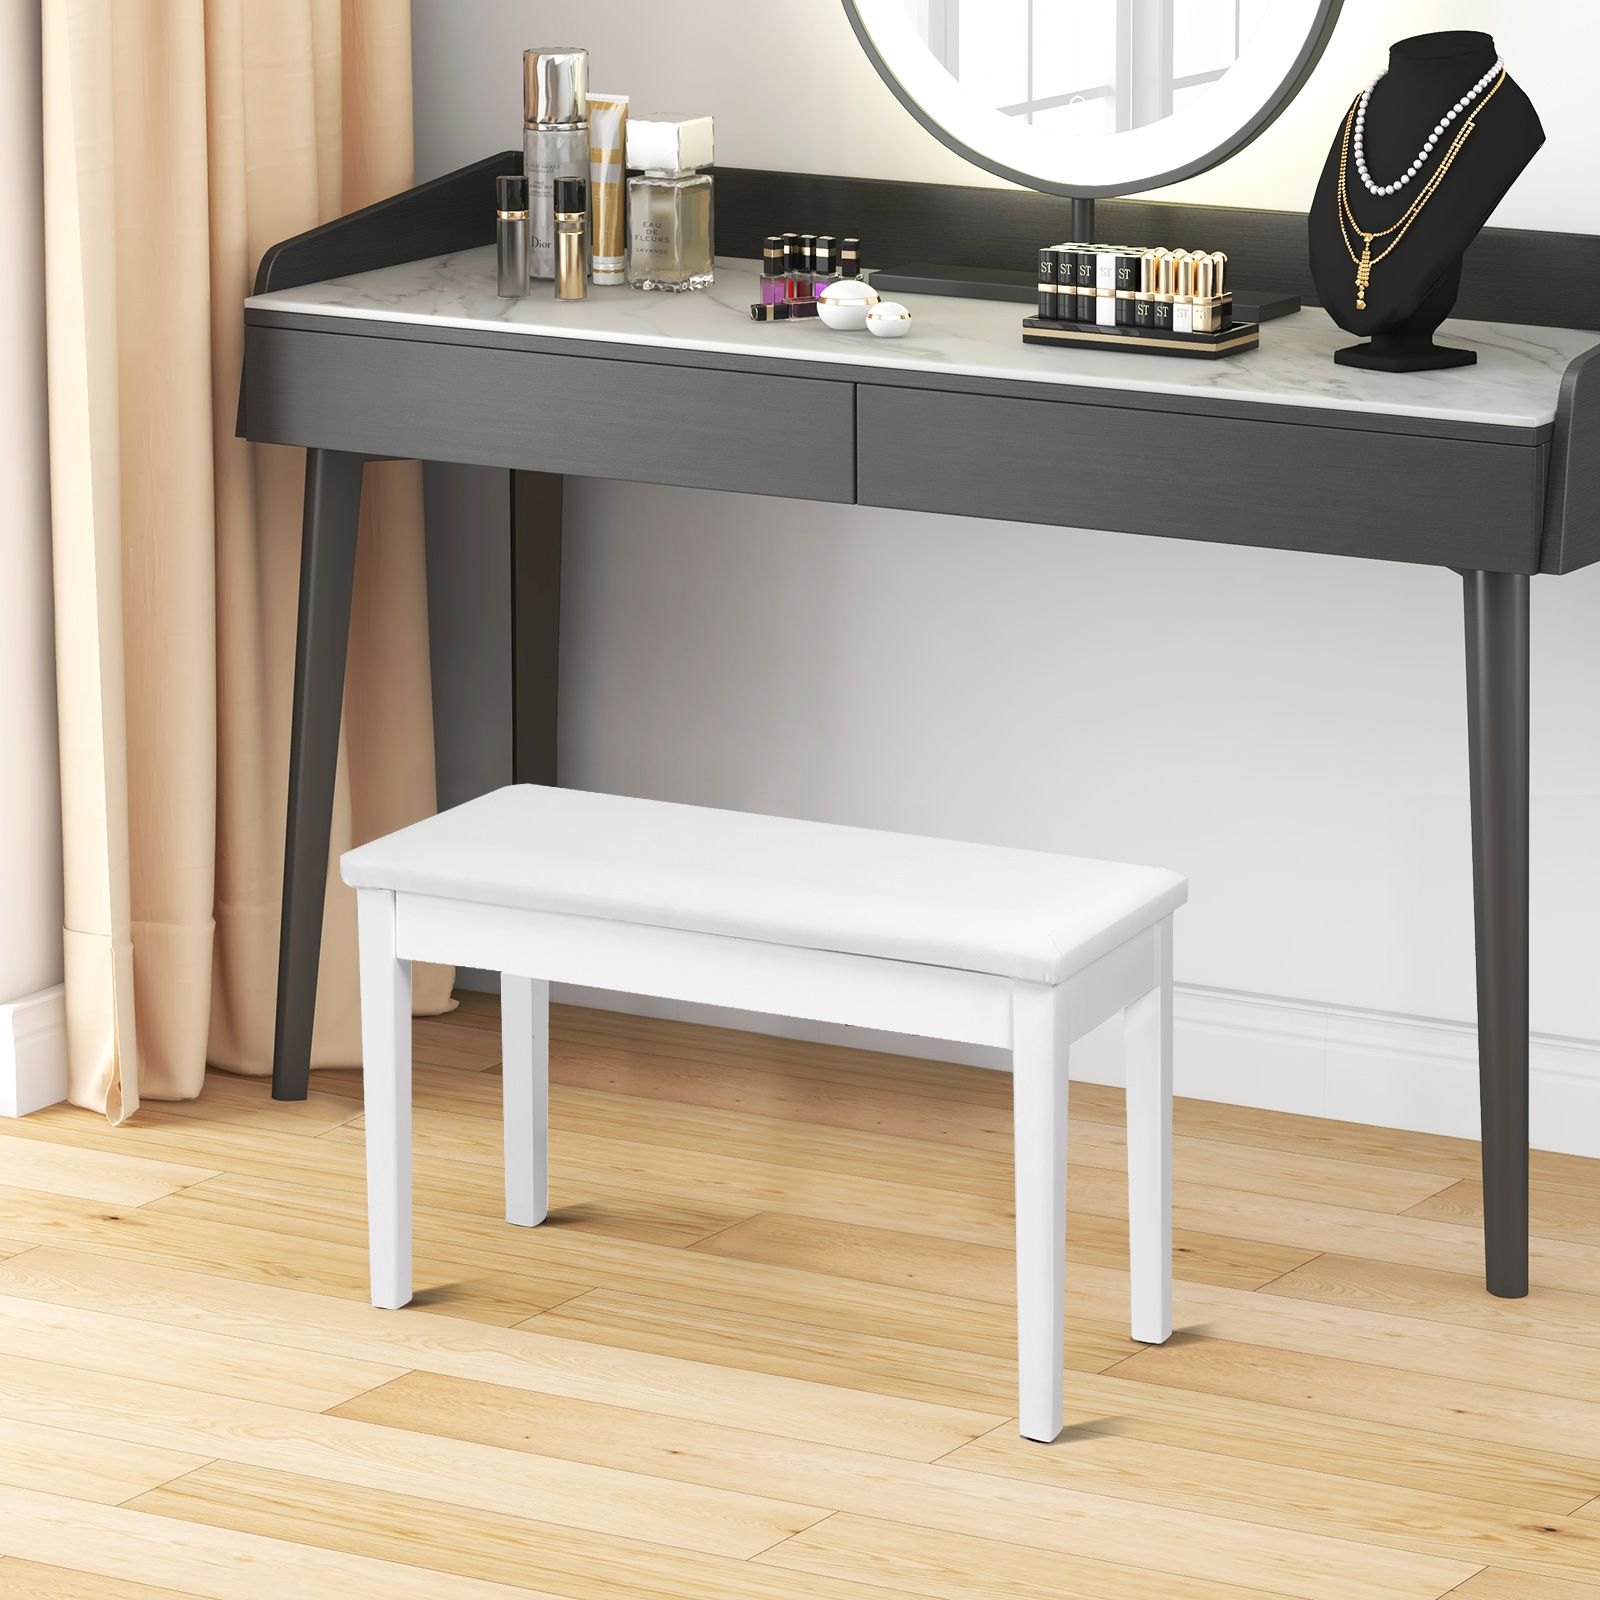 2-in-1 Padded Piano Bench with Storage Space White